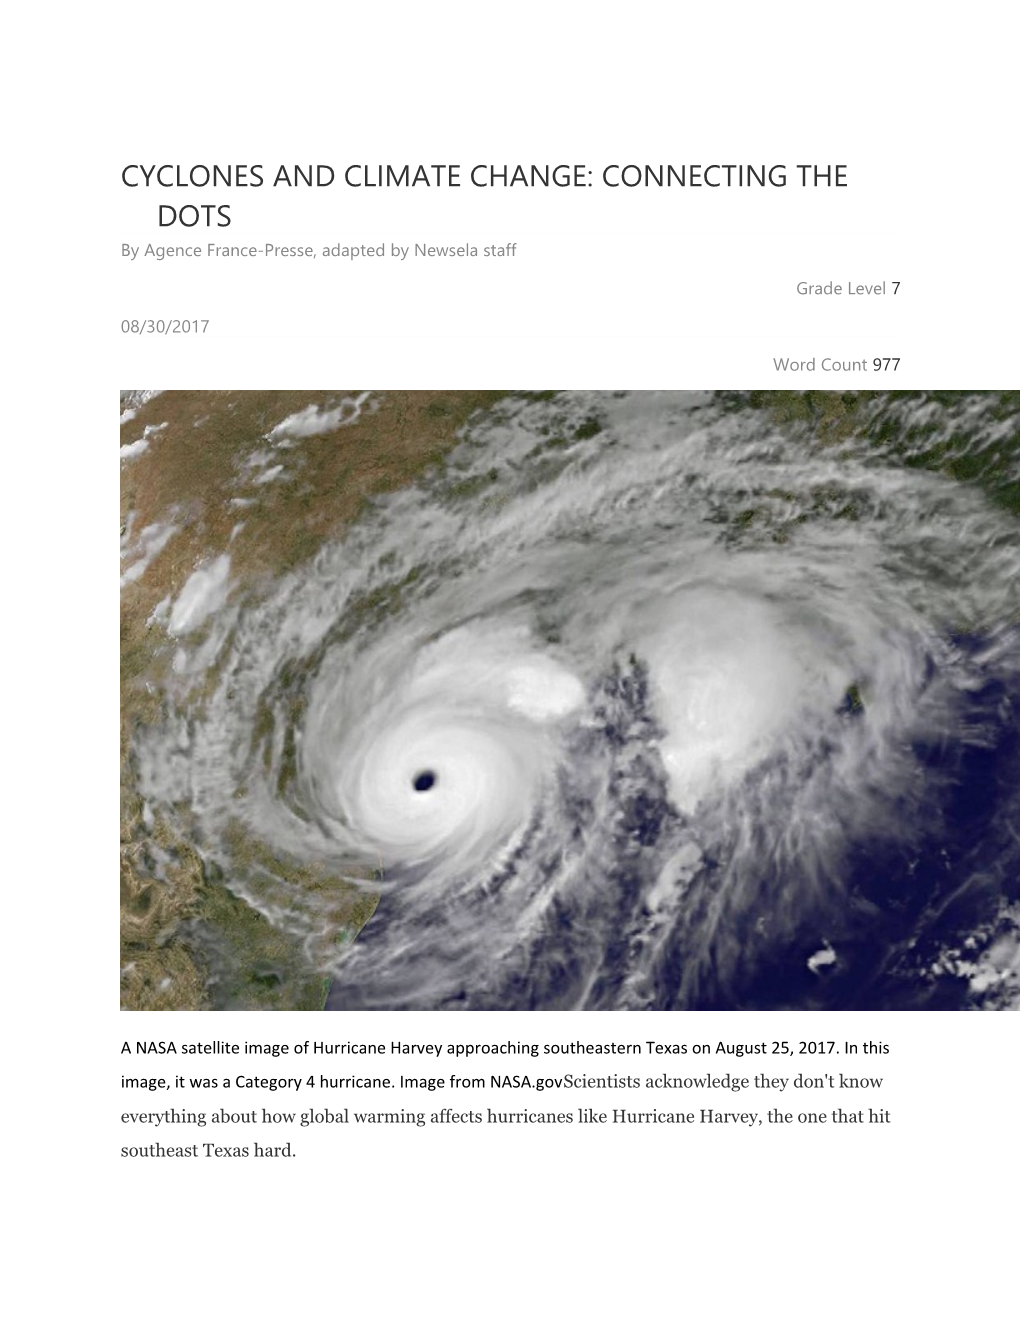 Cyclones and Climate Change: Connecting the Dots